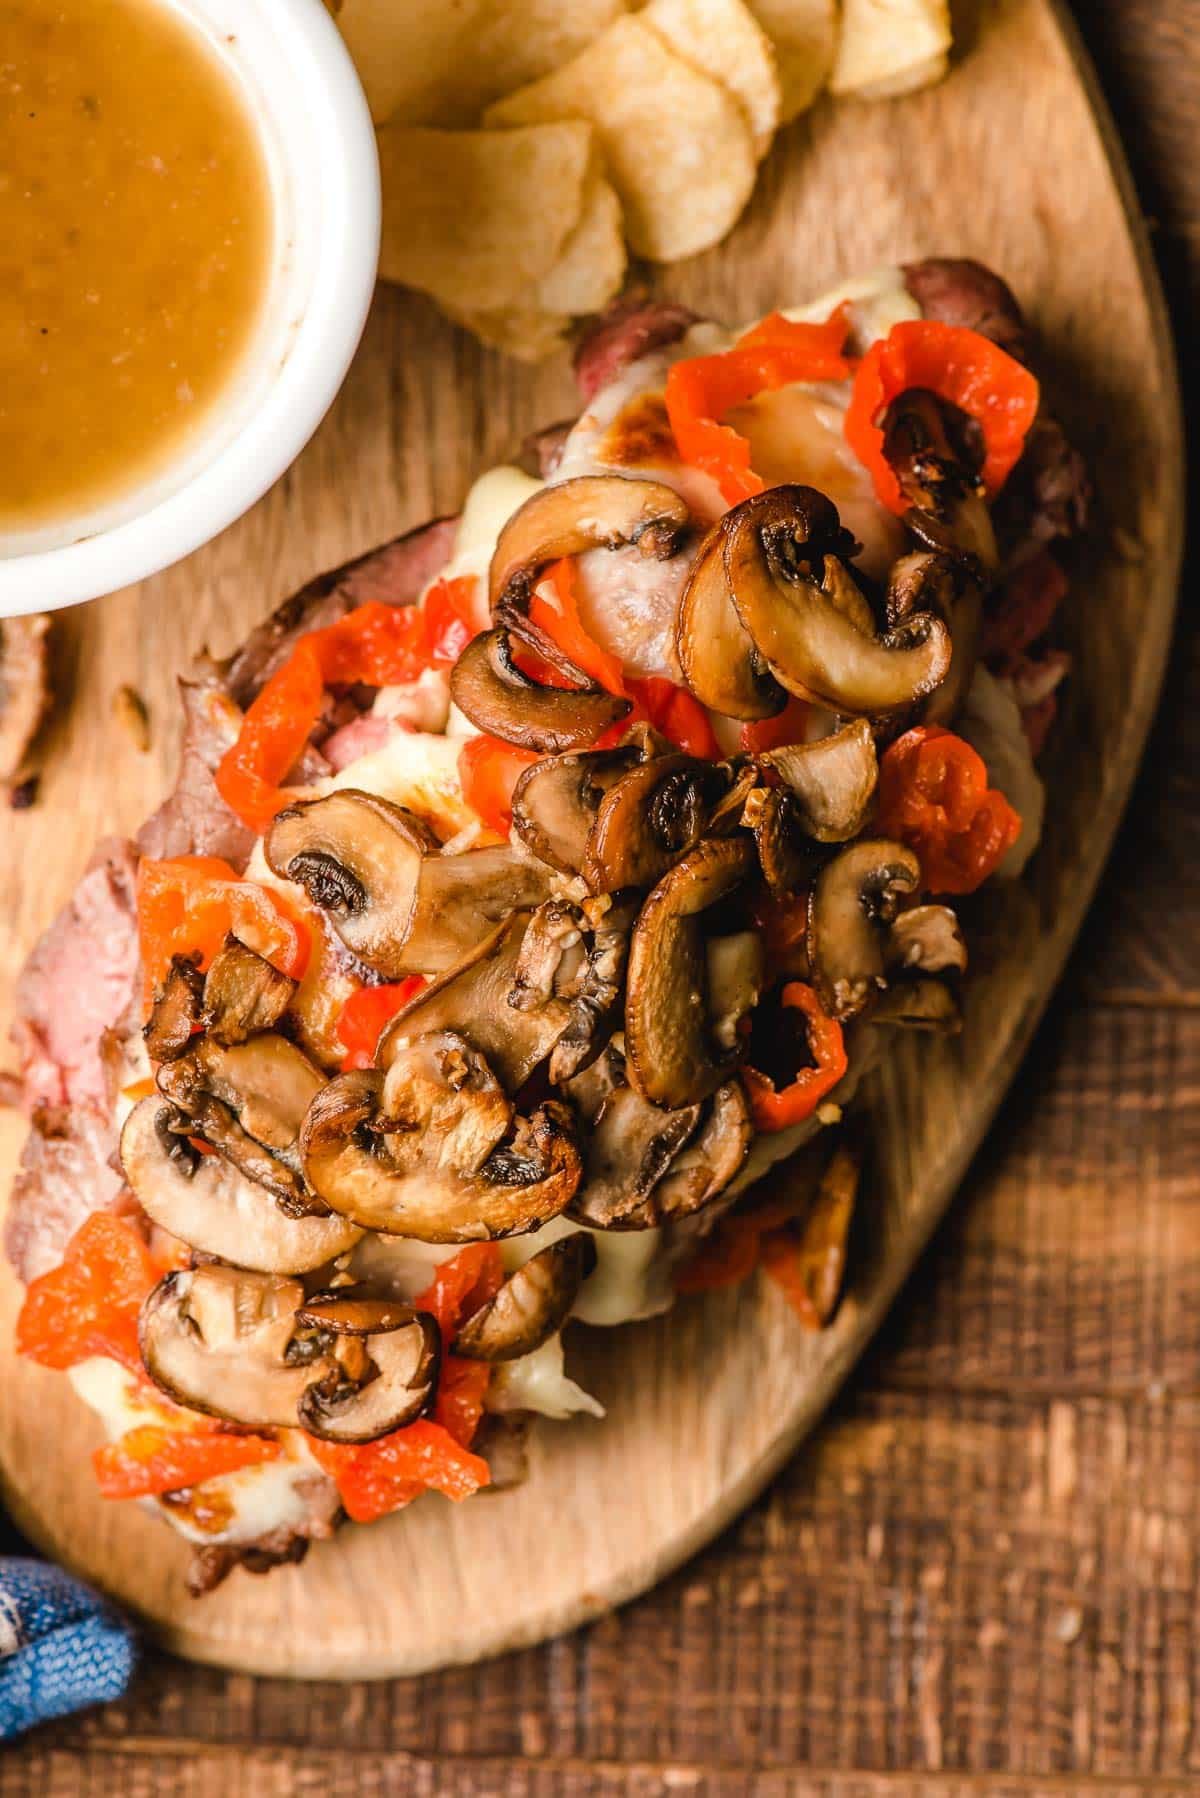 Open face prime rib sandwich with mushrooms and red peppers.